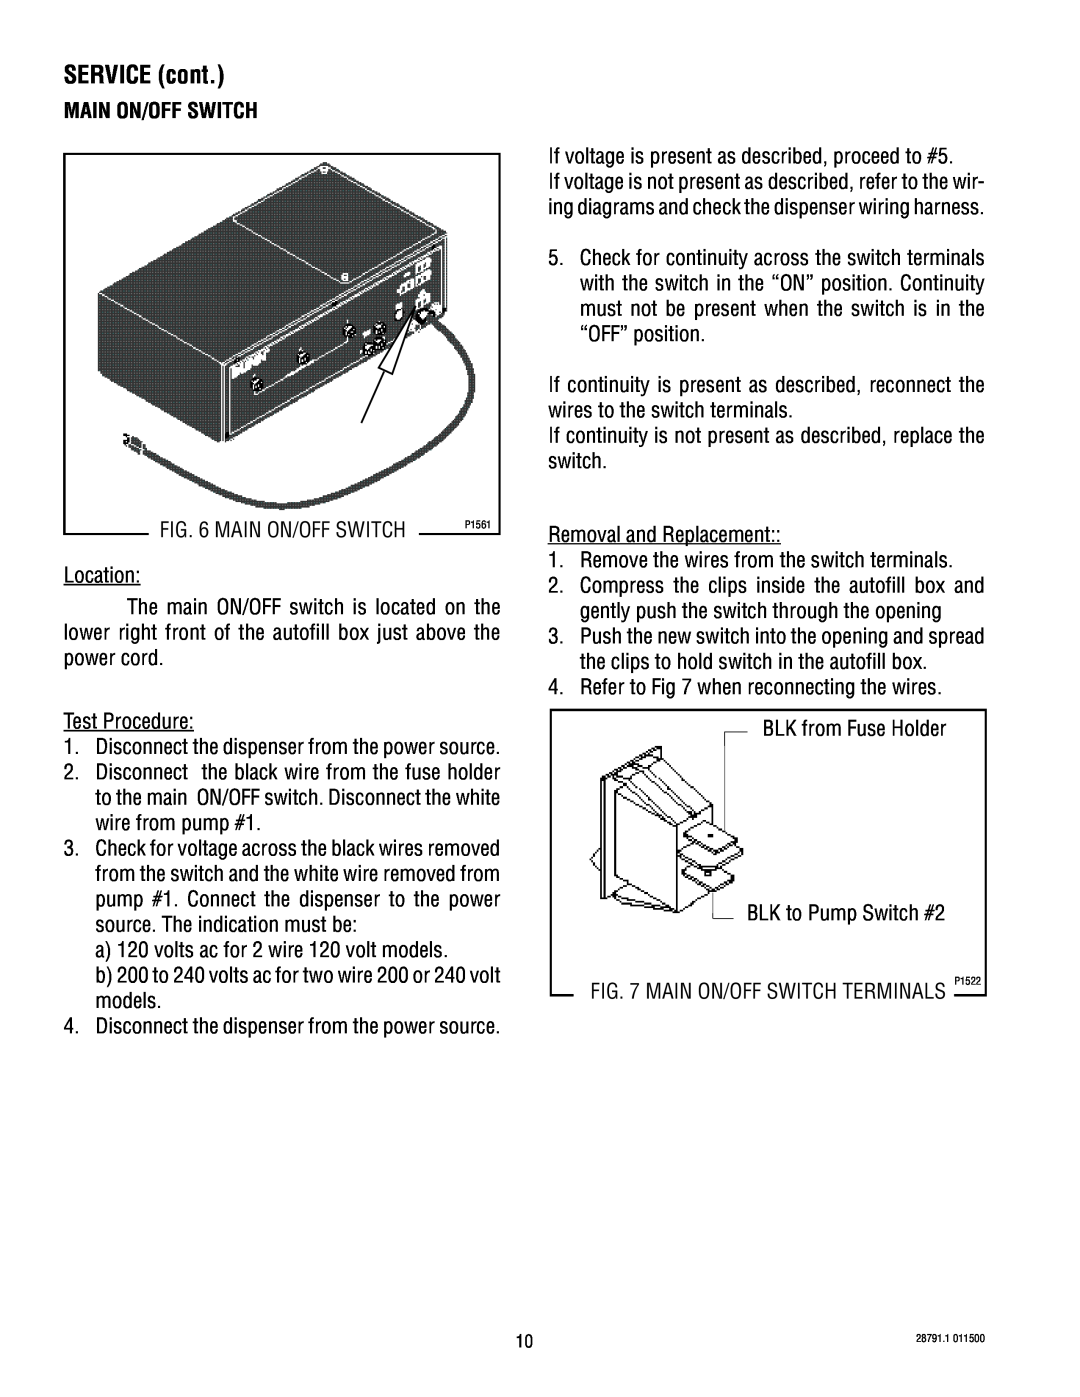 Bunn AF PR-3 service manual SERVICE cont, Main On/Off Switch 